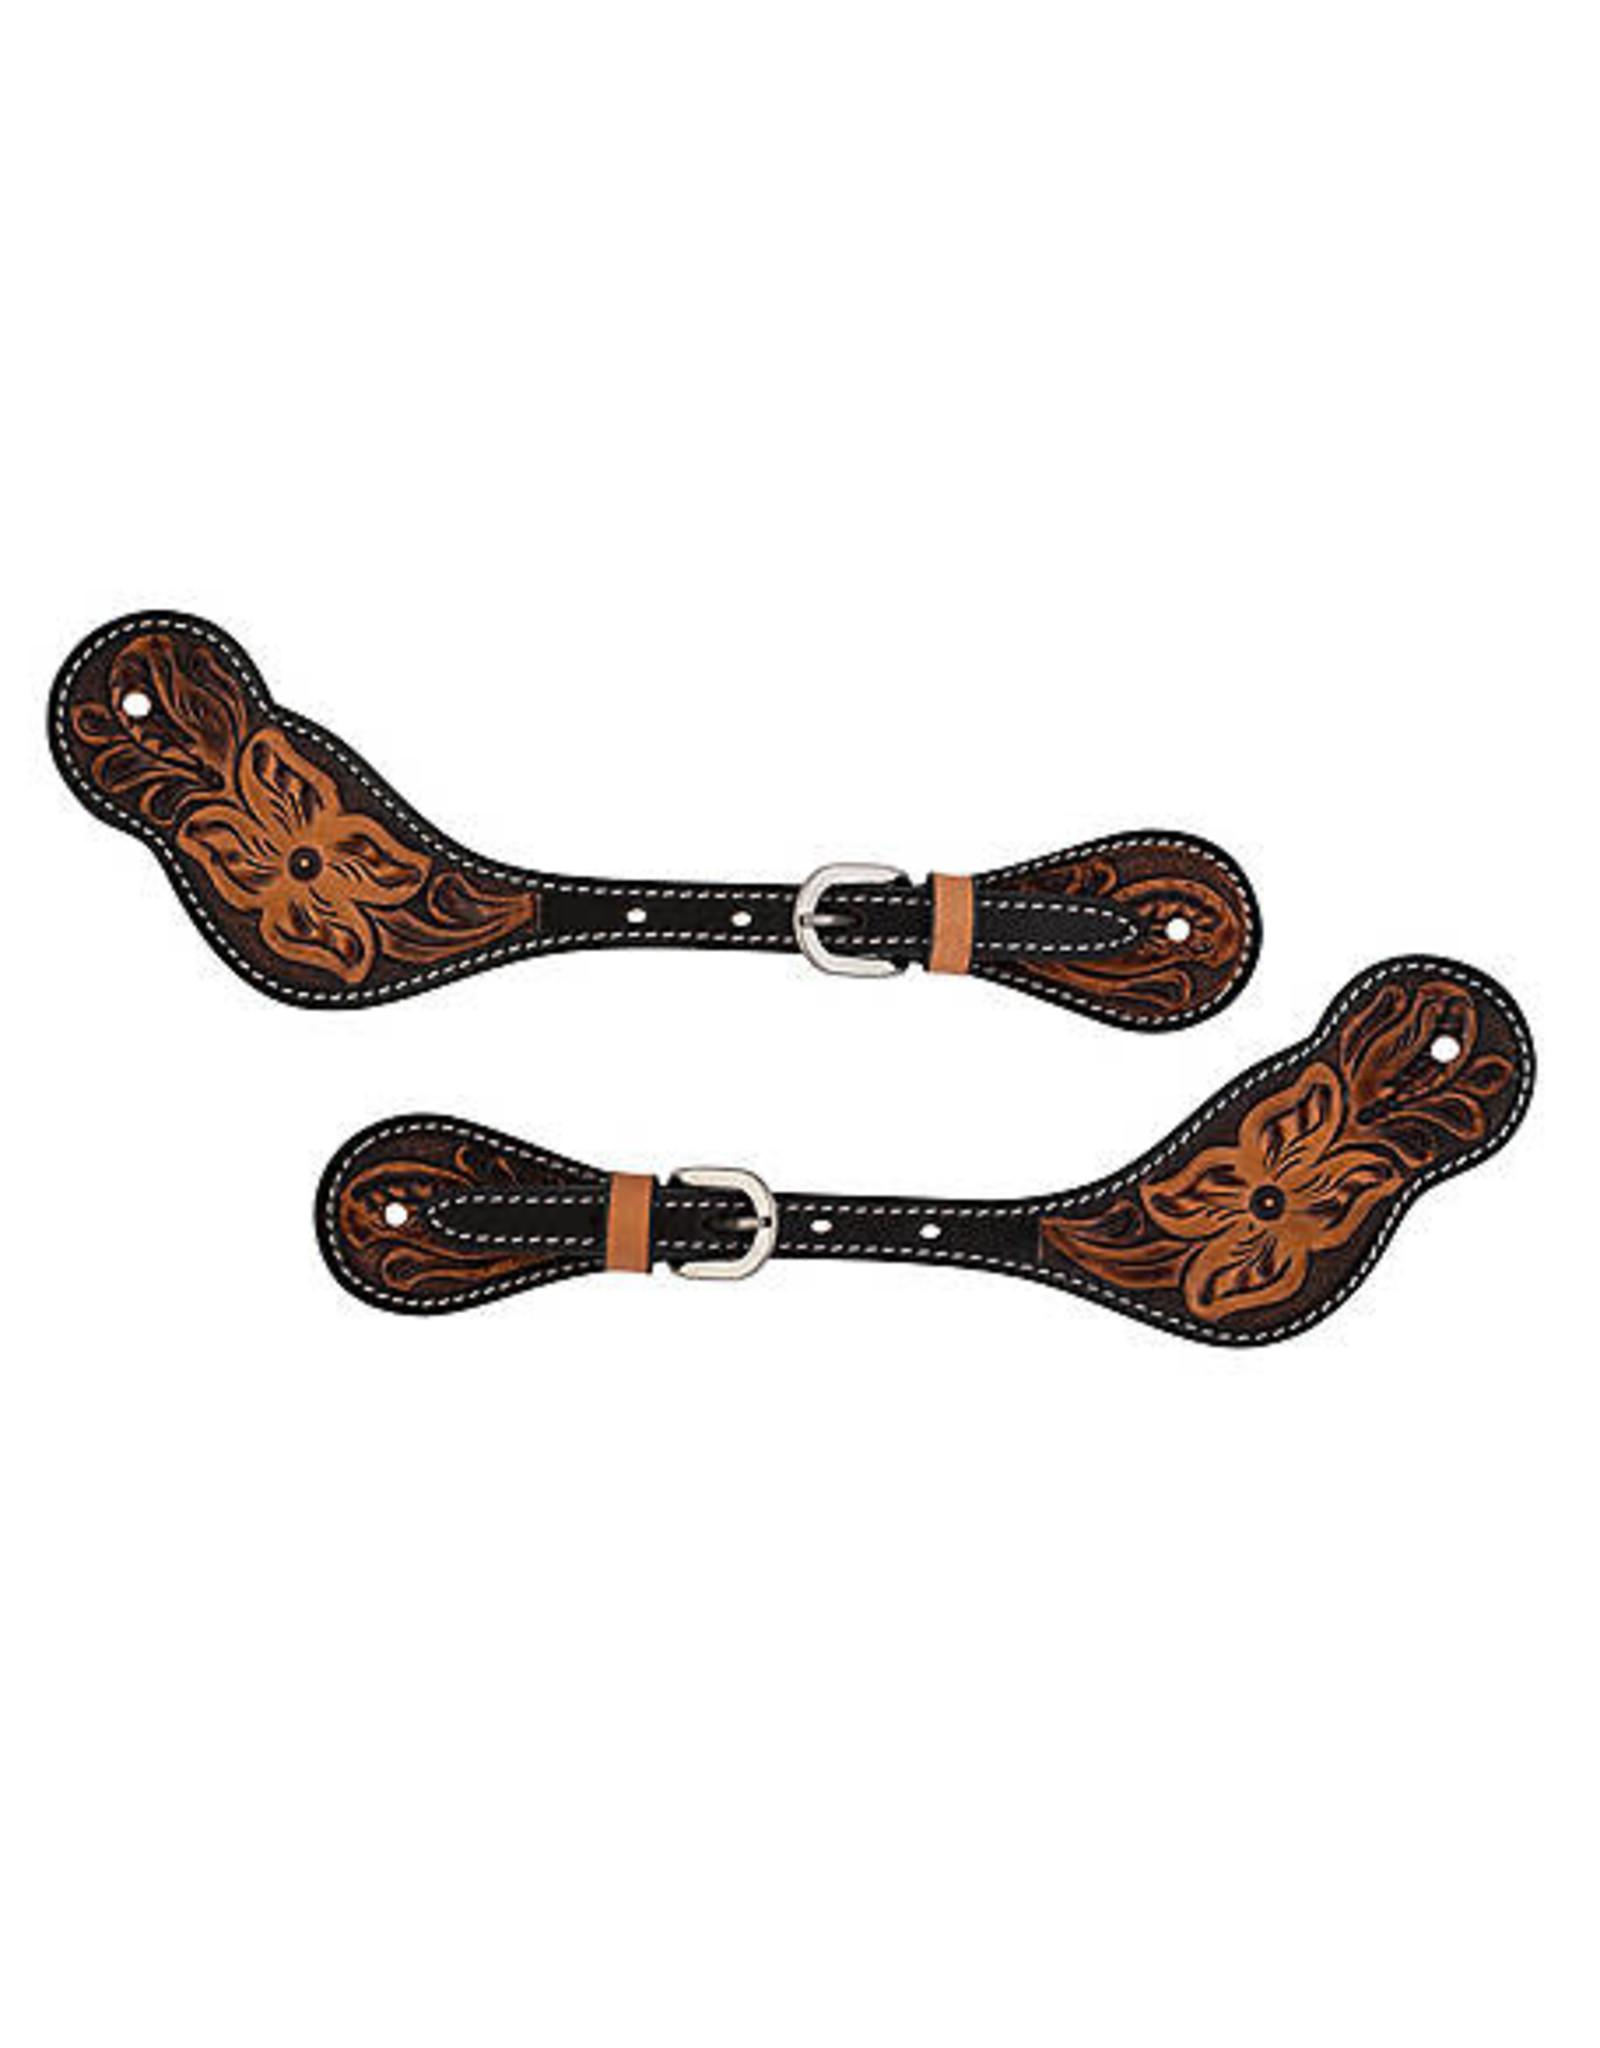 Turquoise Cross Light Oil Floral Tooled 45-0400 Spur Straps